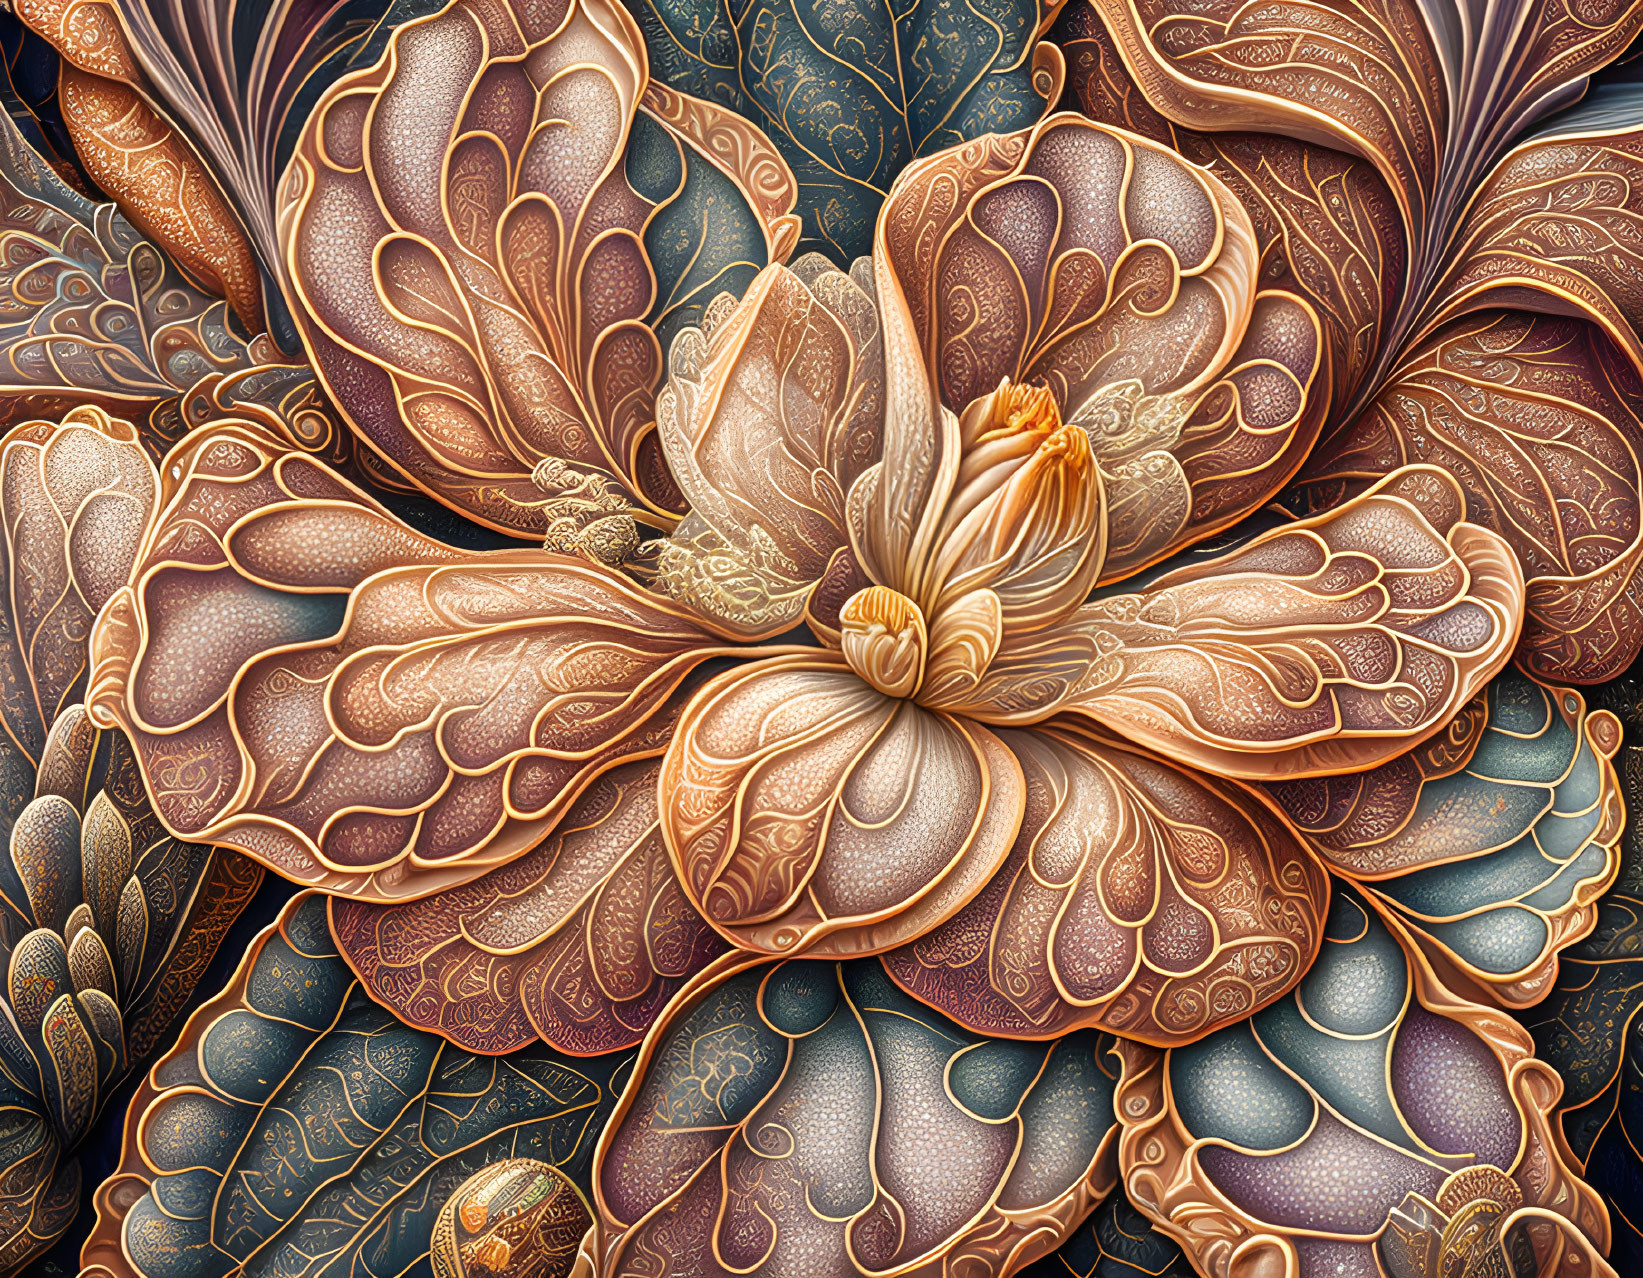 Detailed Illustration of Ornate Flowers in Orange, Gold, and Blue